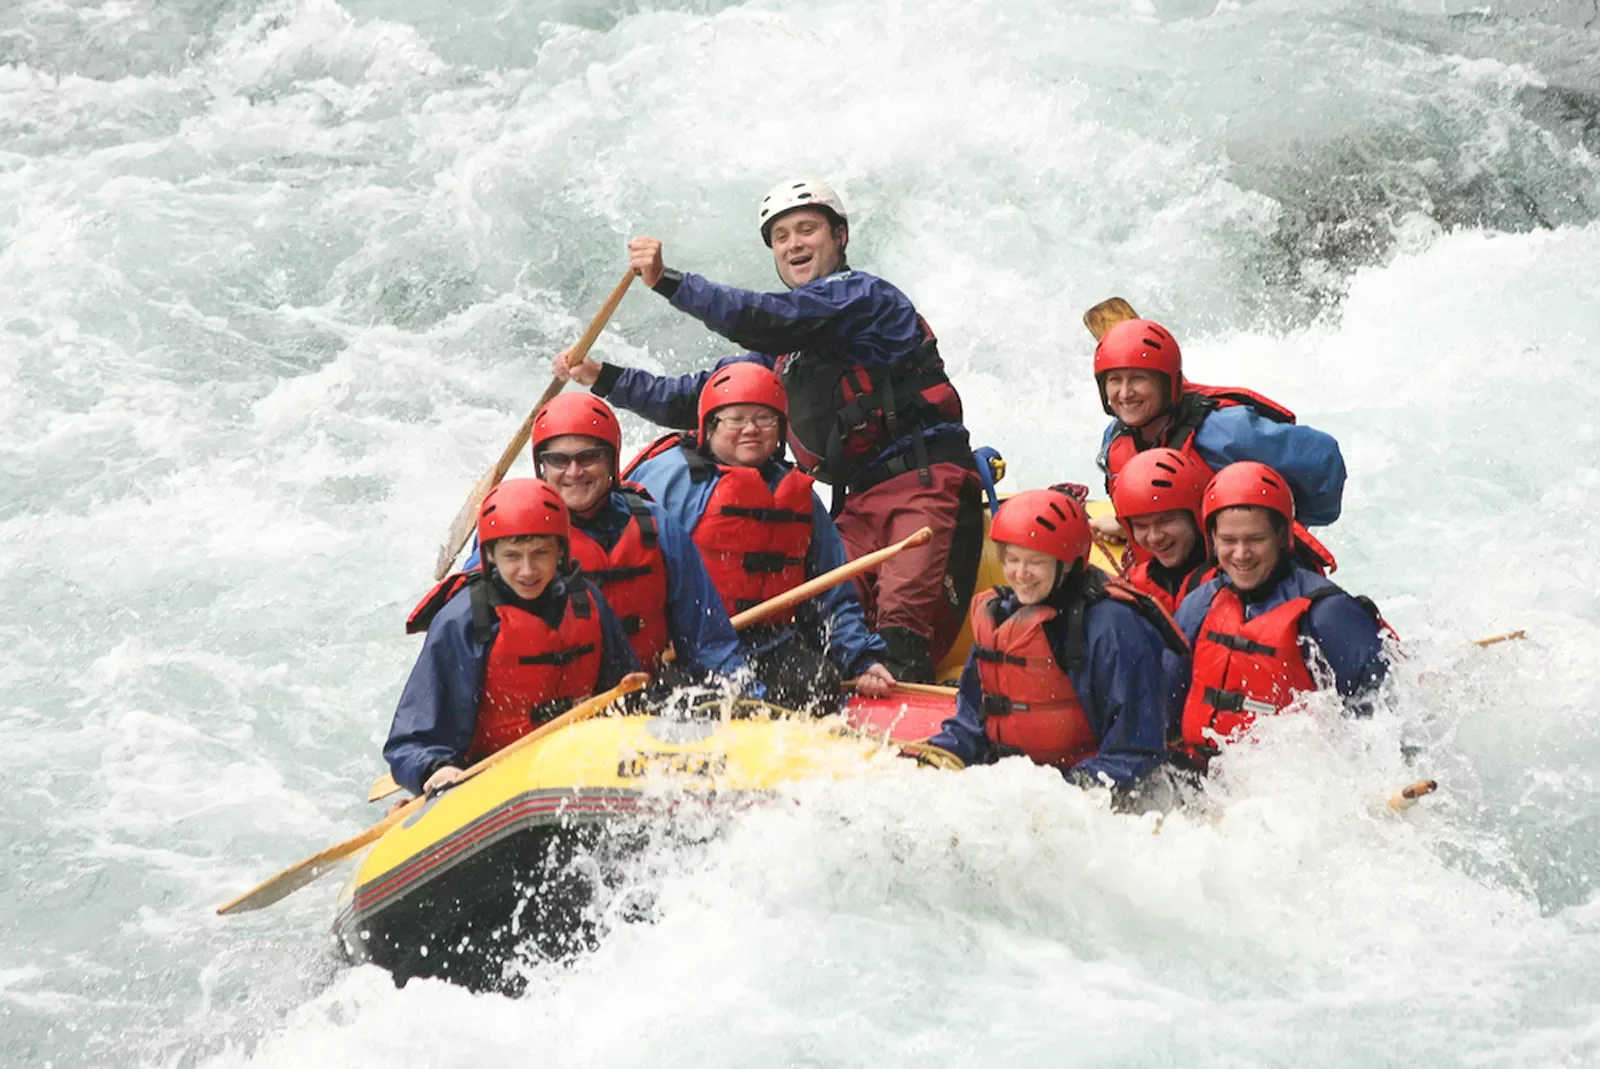 Rafting through white water rapids in New Zealand